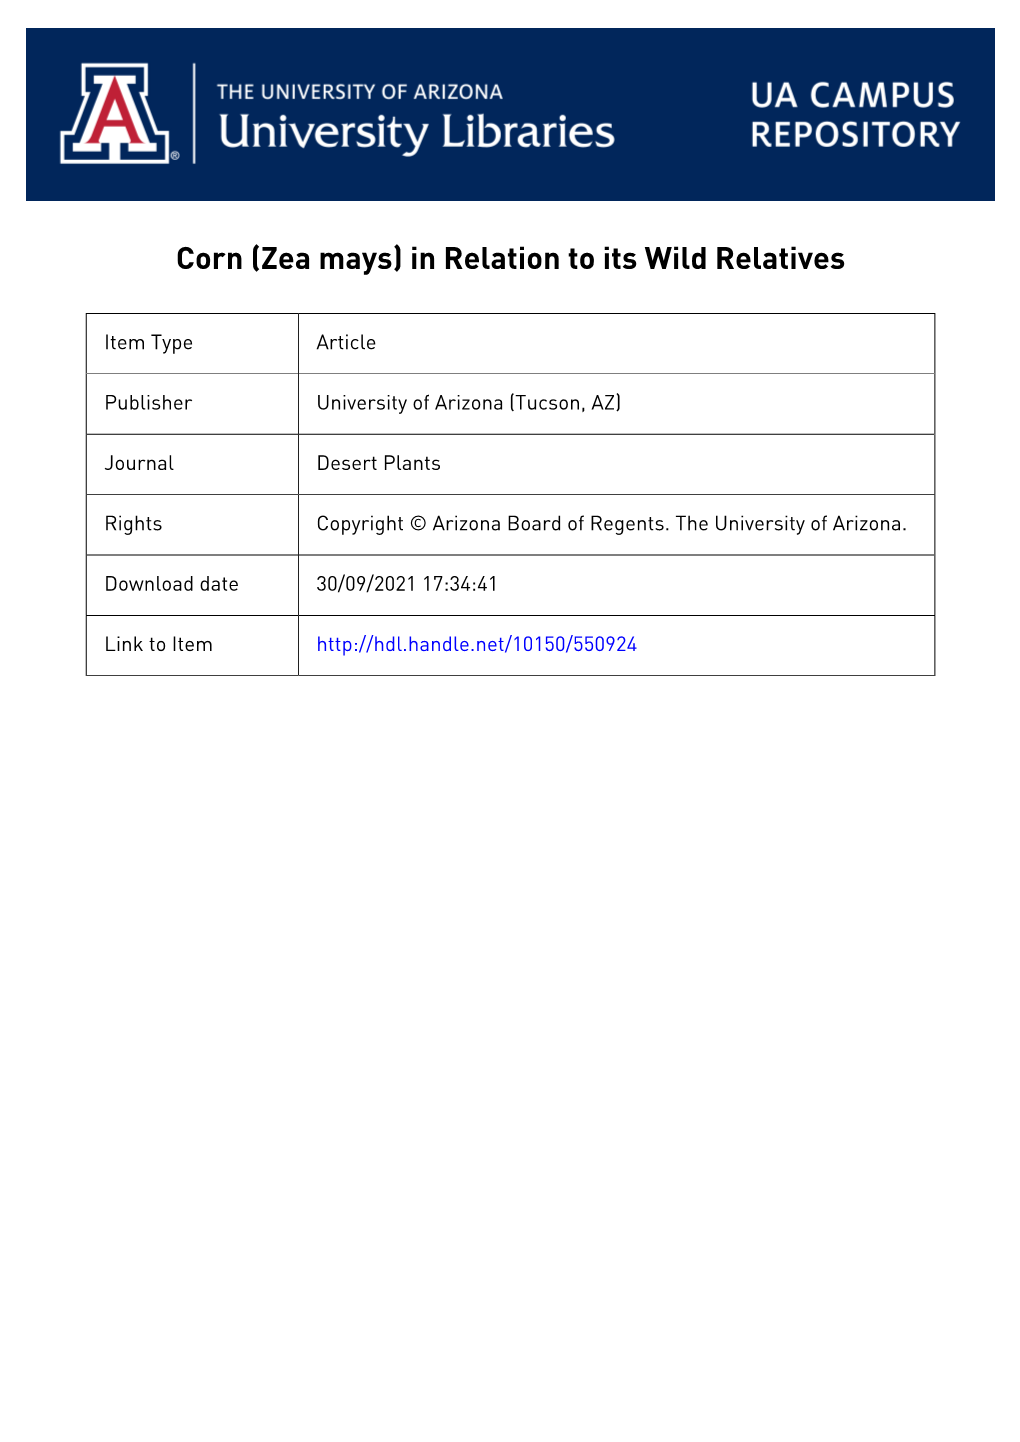 Corn (Zea Mays) in Relation to Its Wild Relatives